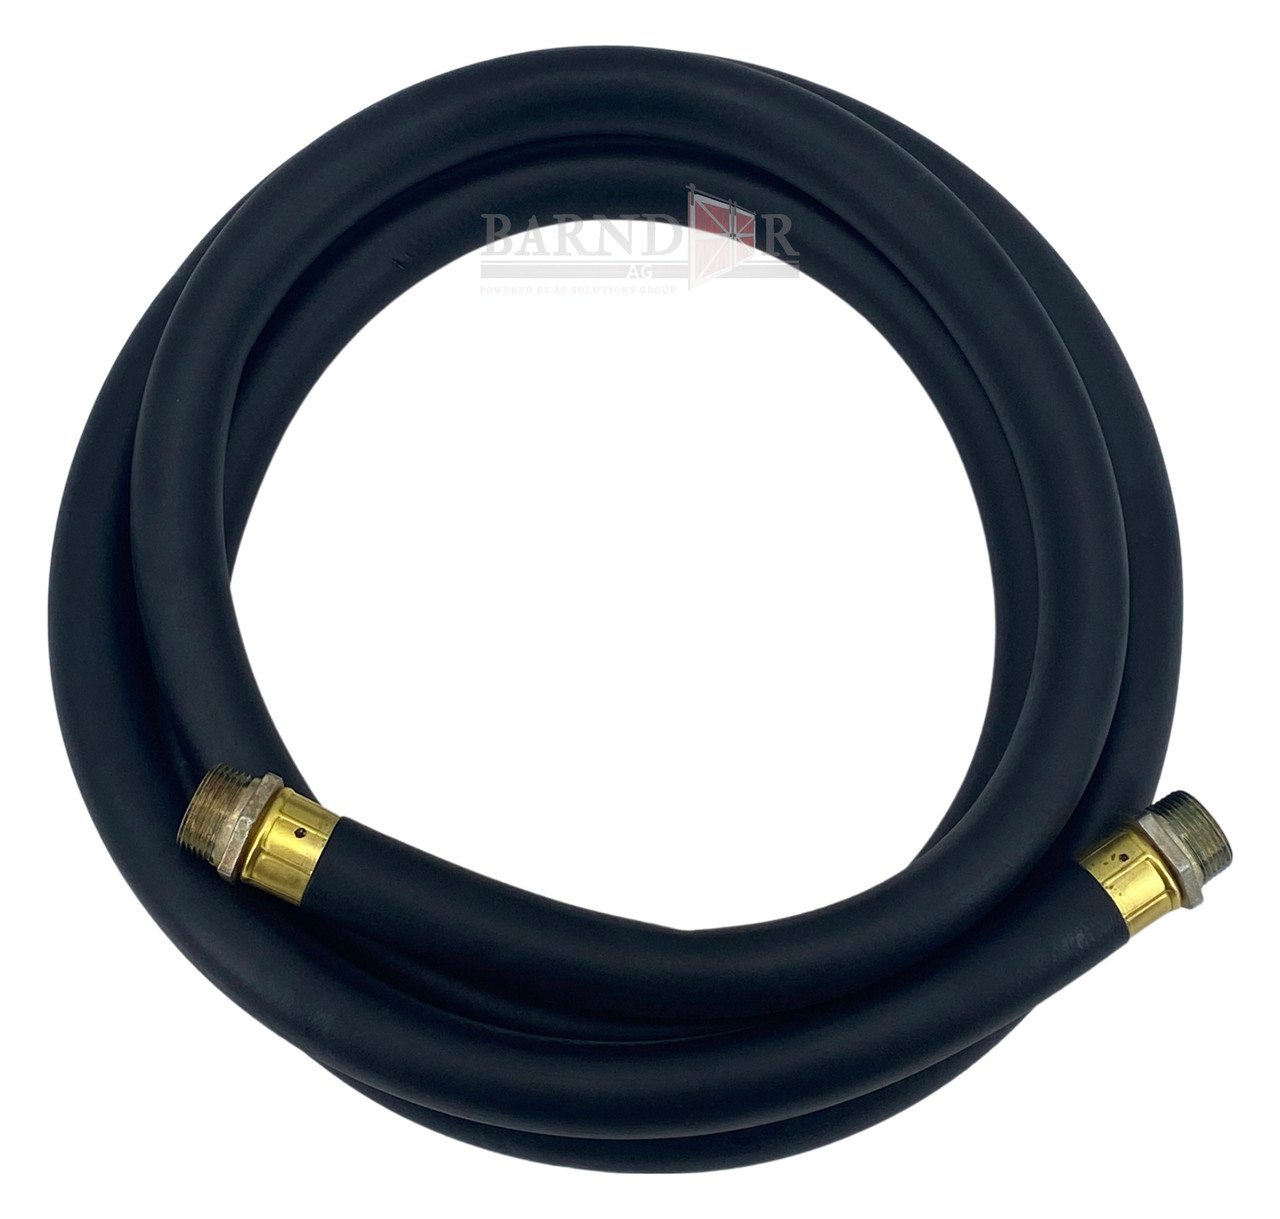 Apache 98108490 1 x 15 Farm Fuel Transfer Hose Male x Male Assembly with Static Wire 3 